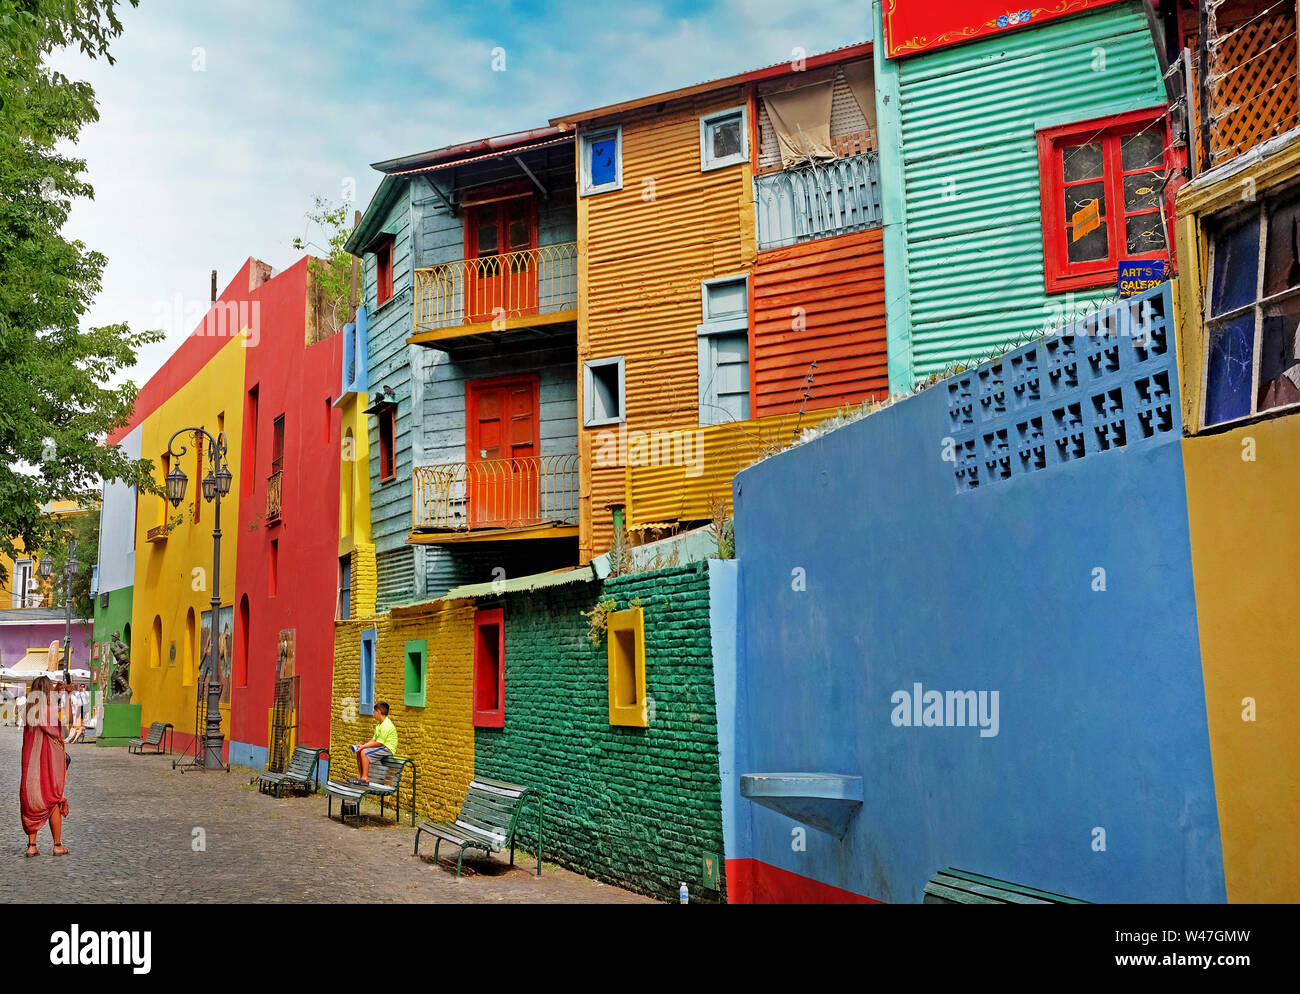 Woman photographing a child in front of colorful buildings of the Argentinean district La Boca, in Buenos Aires, during a summer day with a blue sky. Stock Photo